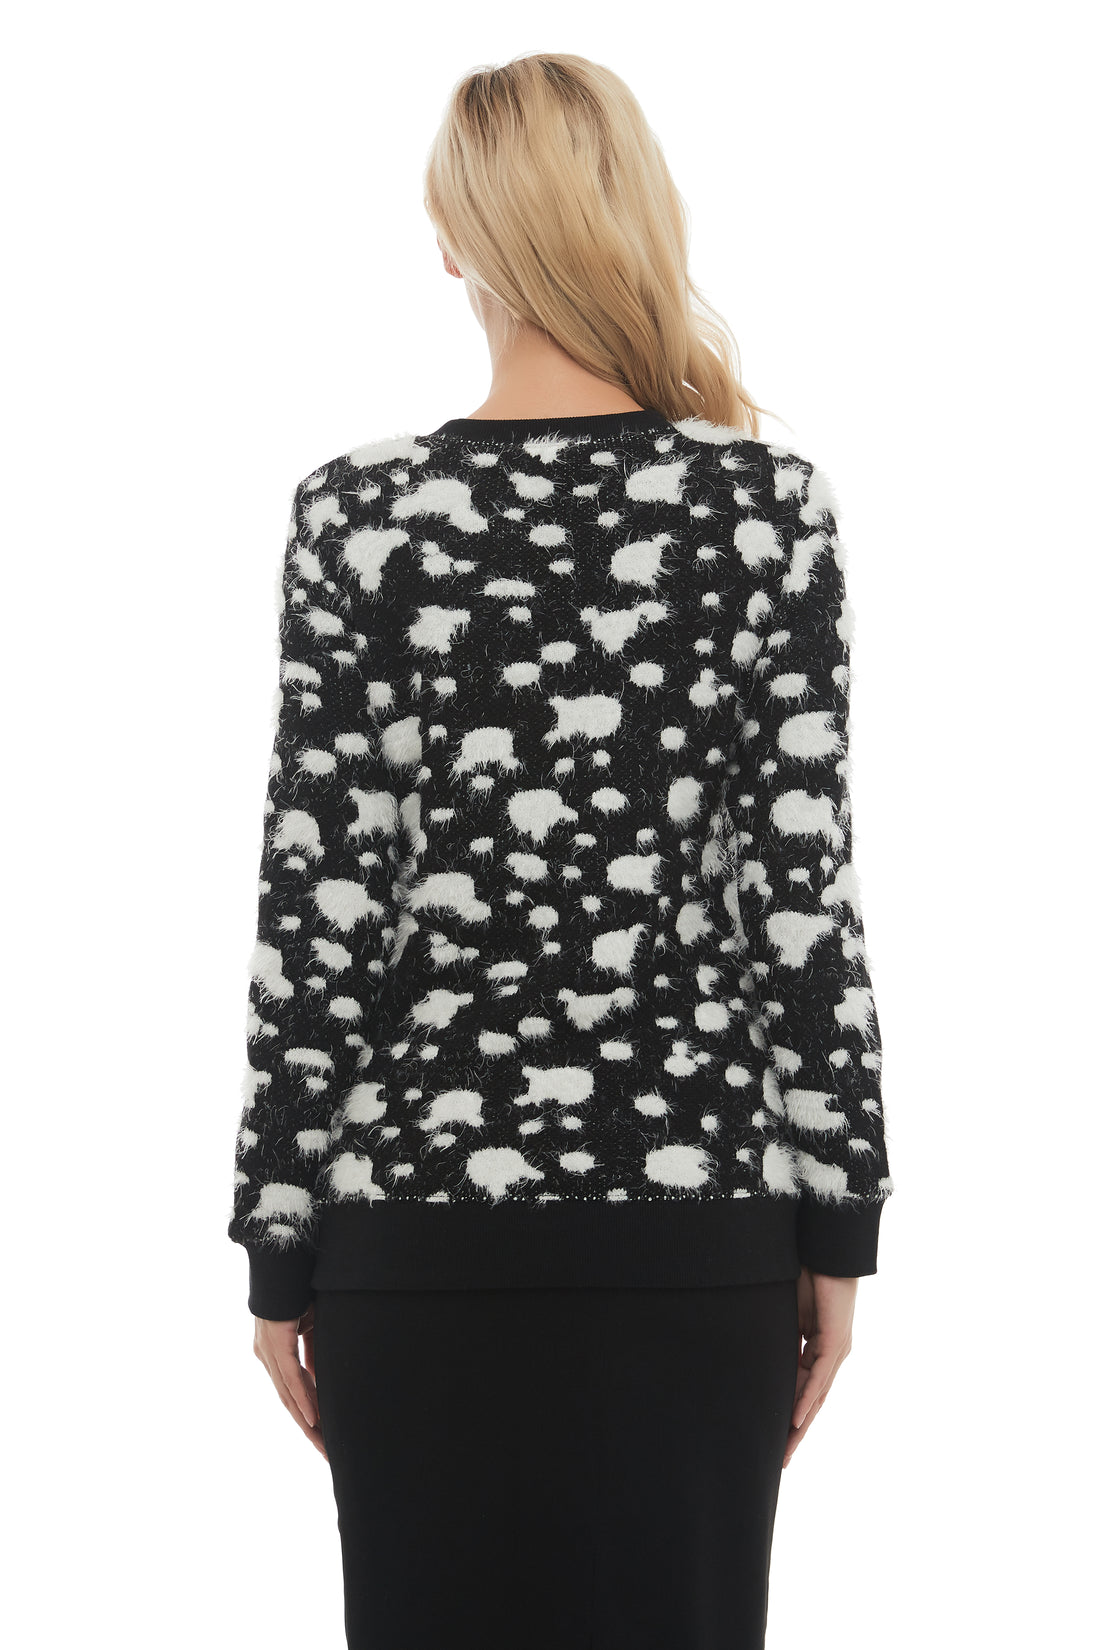 Long Sleeve Modest Mohair Black & White Sweater Top - figaliciousfood